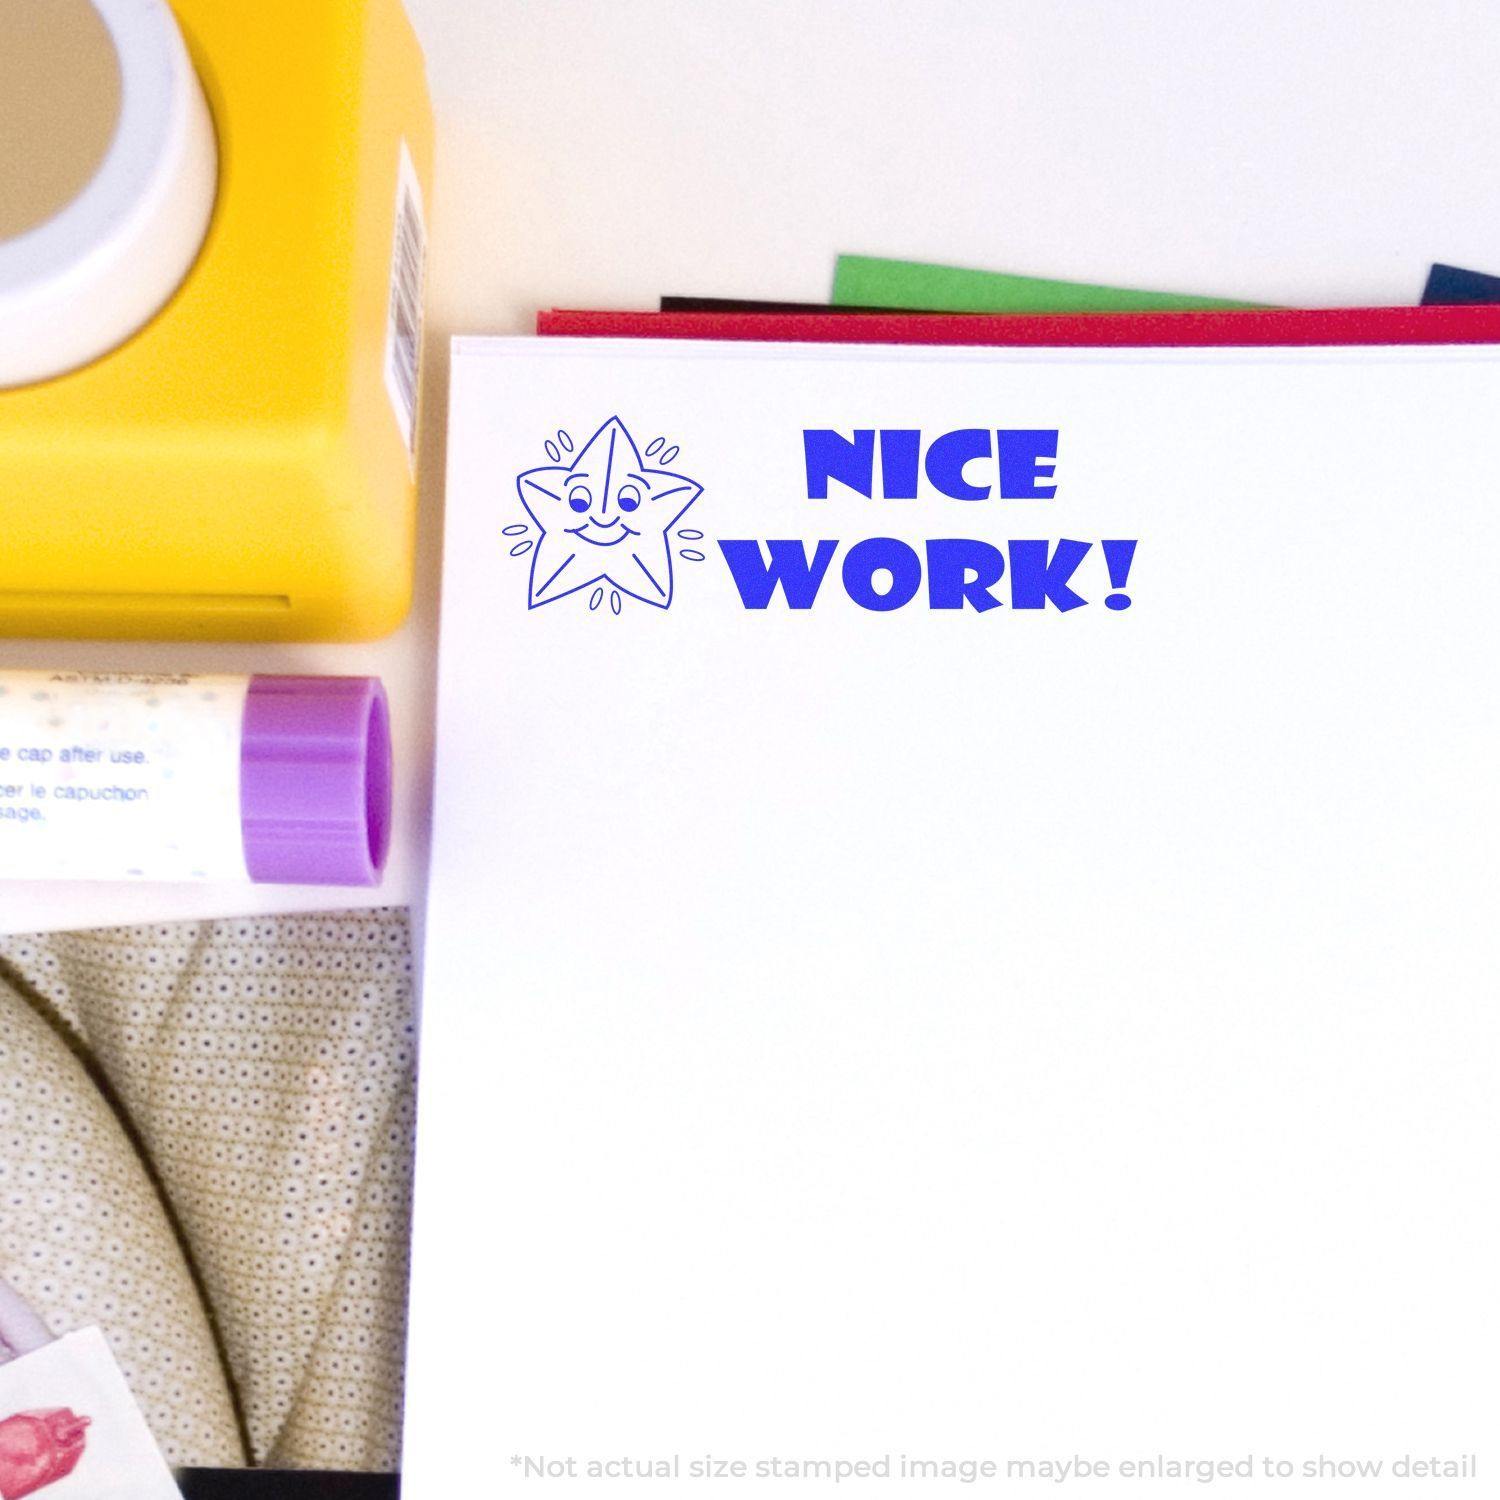 A stock office rubber stamp with a stamped image showing how the text "NICE WORK!" in bold font and a smiling starfish image is displayed after stamping.